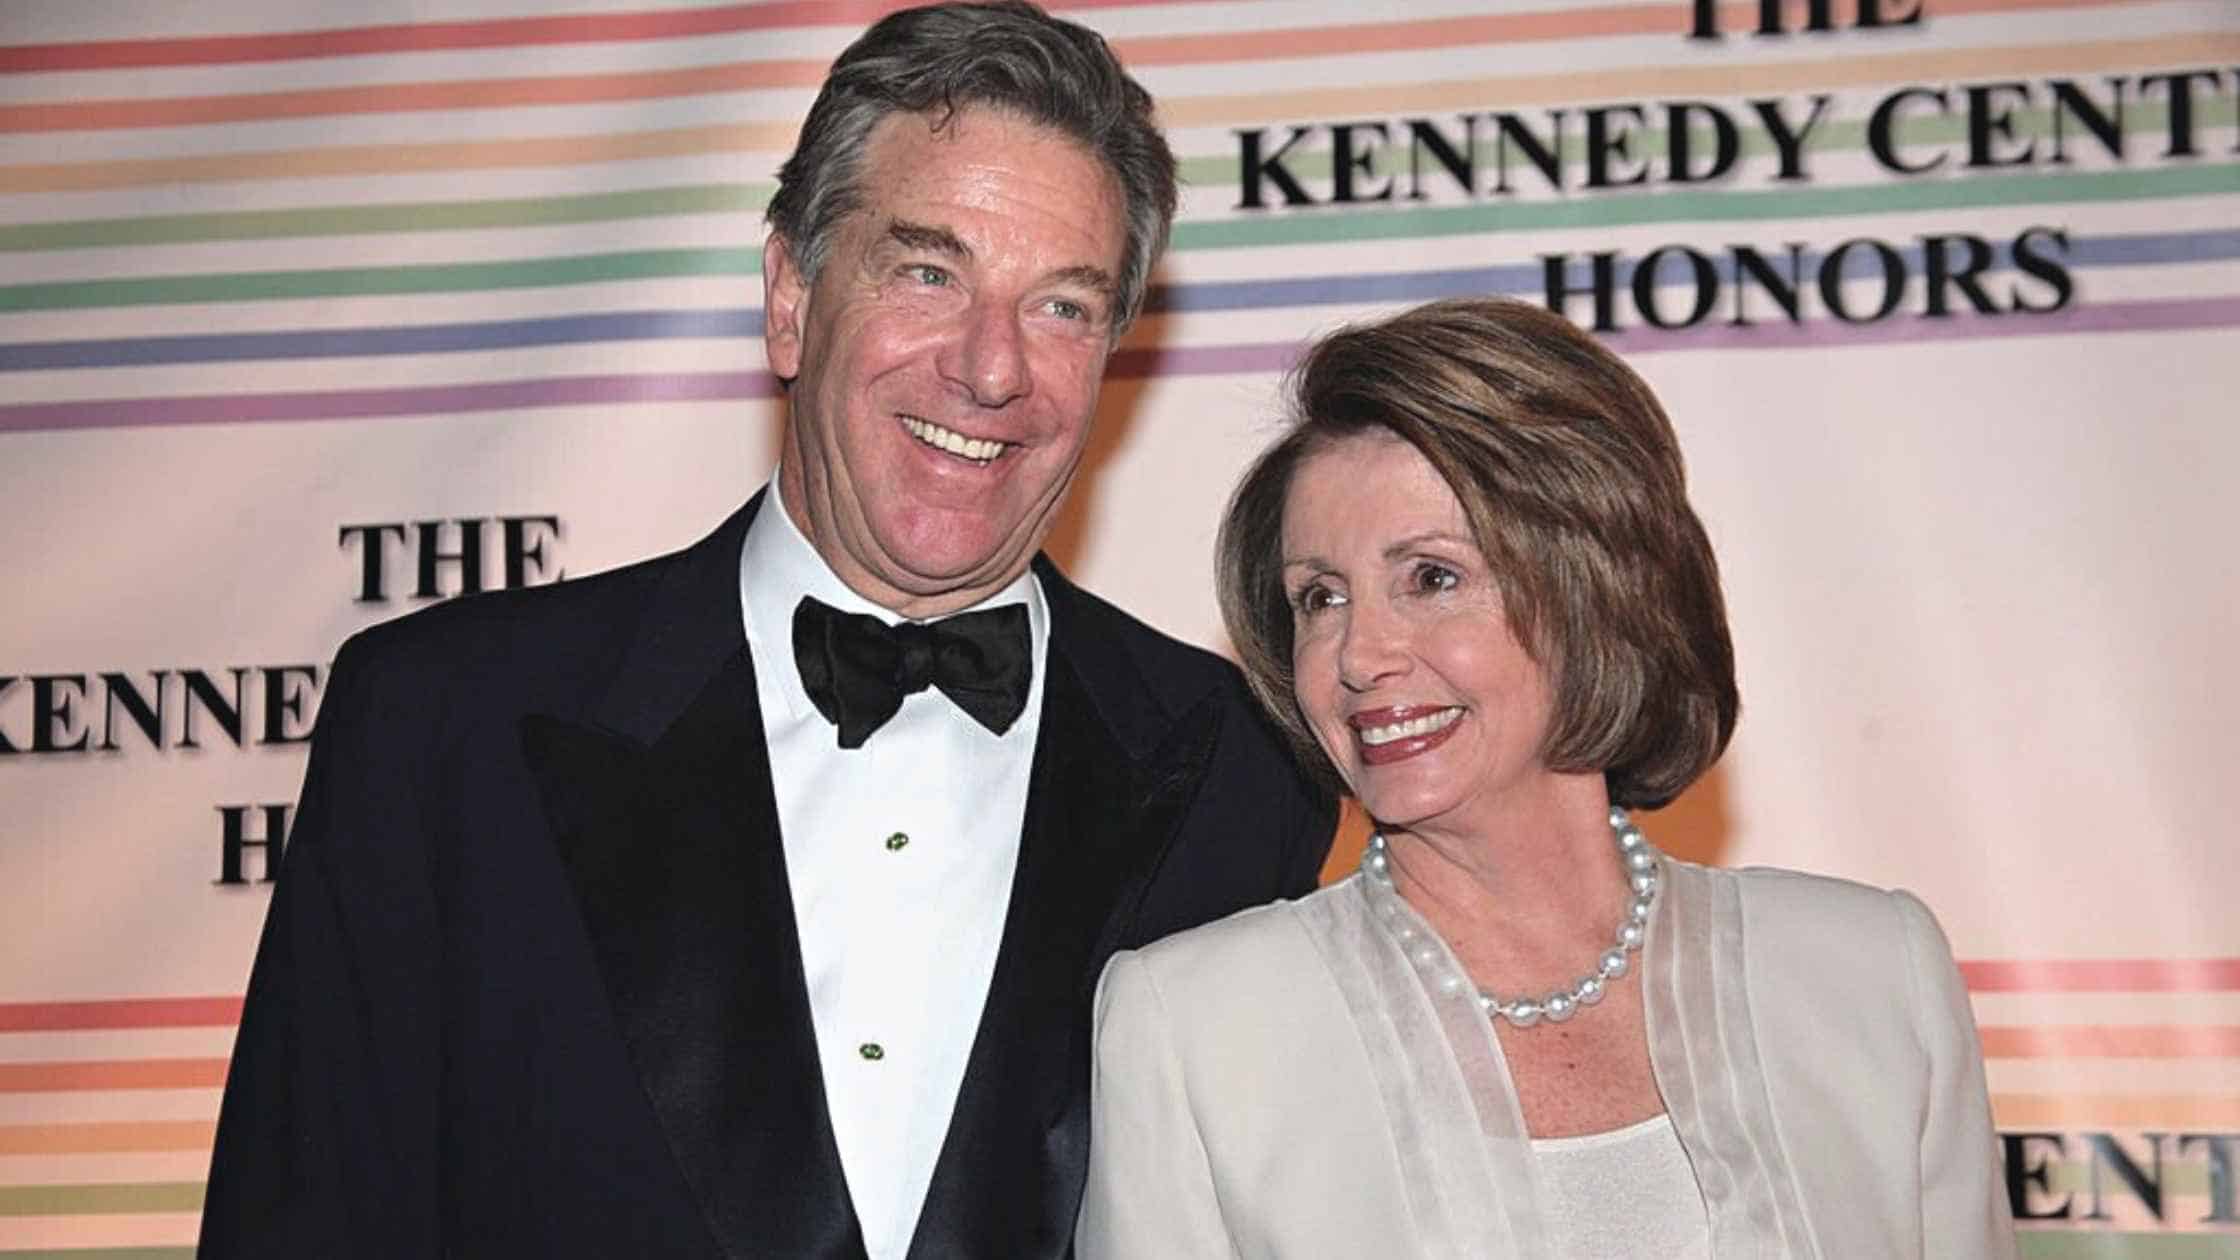 Is Paul Pelosi Gay? What Really Happened To Him?